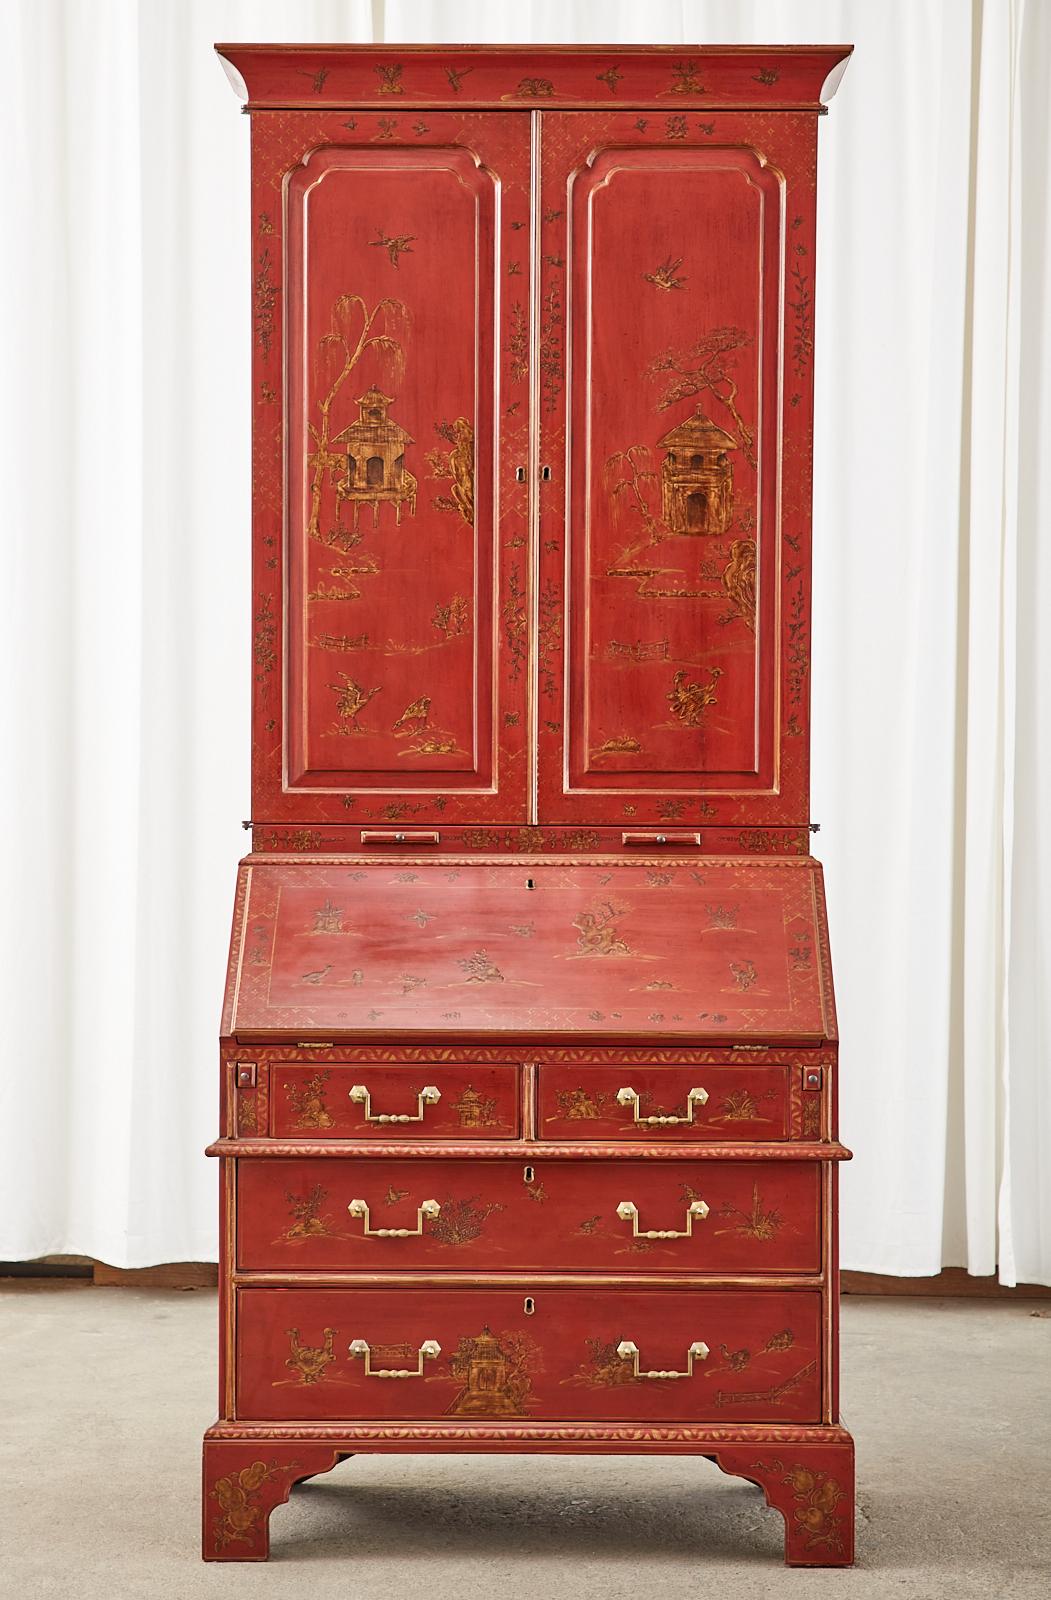 Grand English Geoge III style secretaire bookcase constructed by one of the finest furniture makers in the country Burton-Ching LTD in San Francisco, CA. The two part case features a dark red lacquered ground embellished with chinoiserie revival